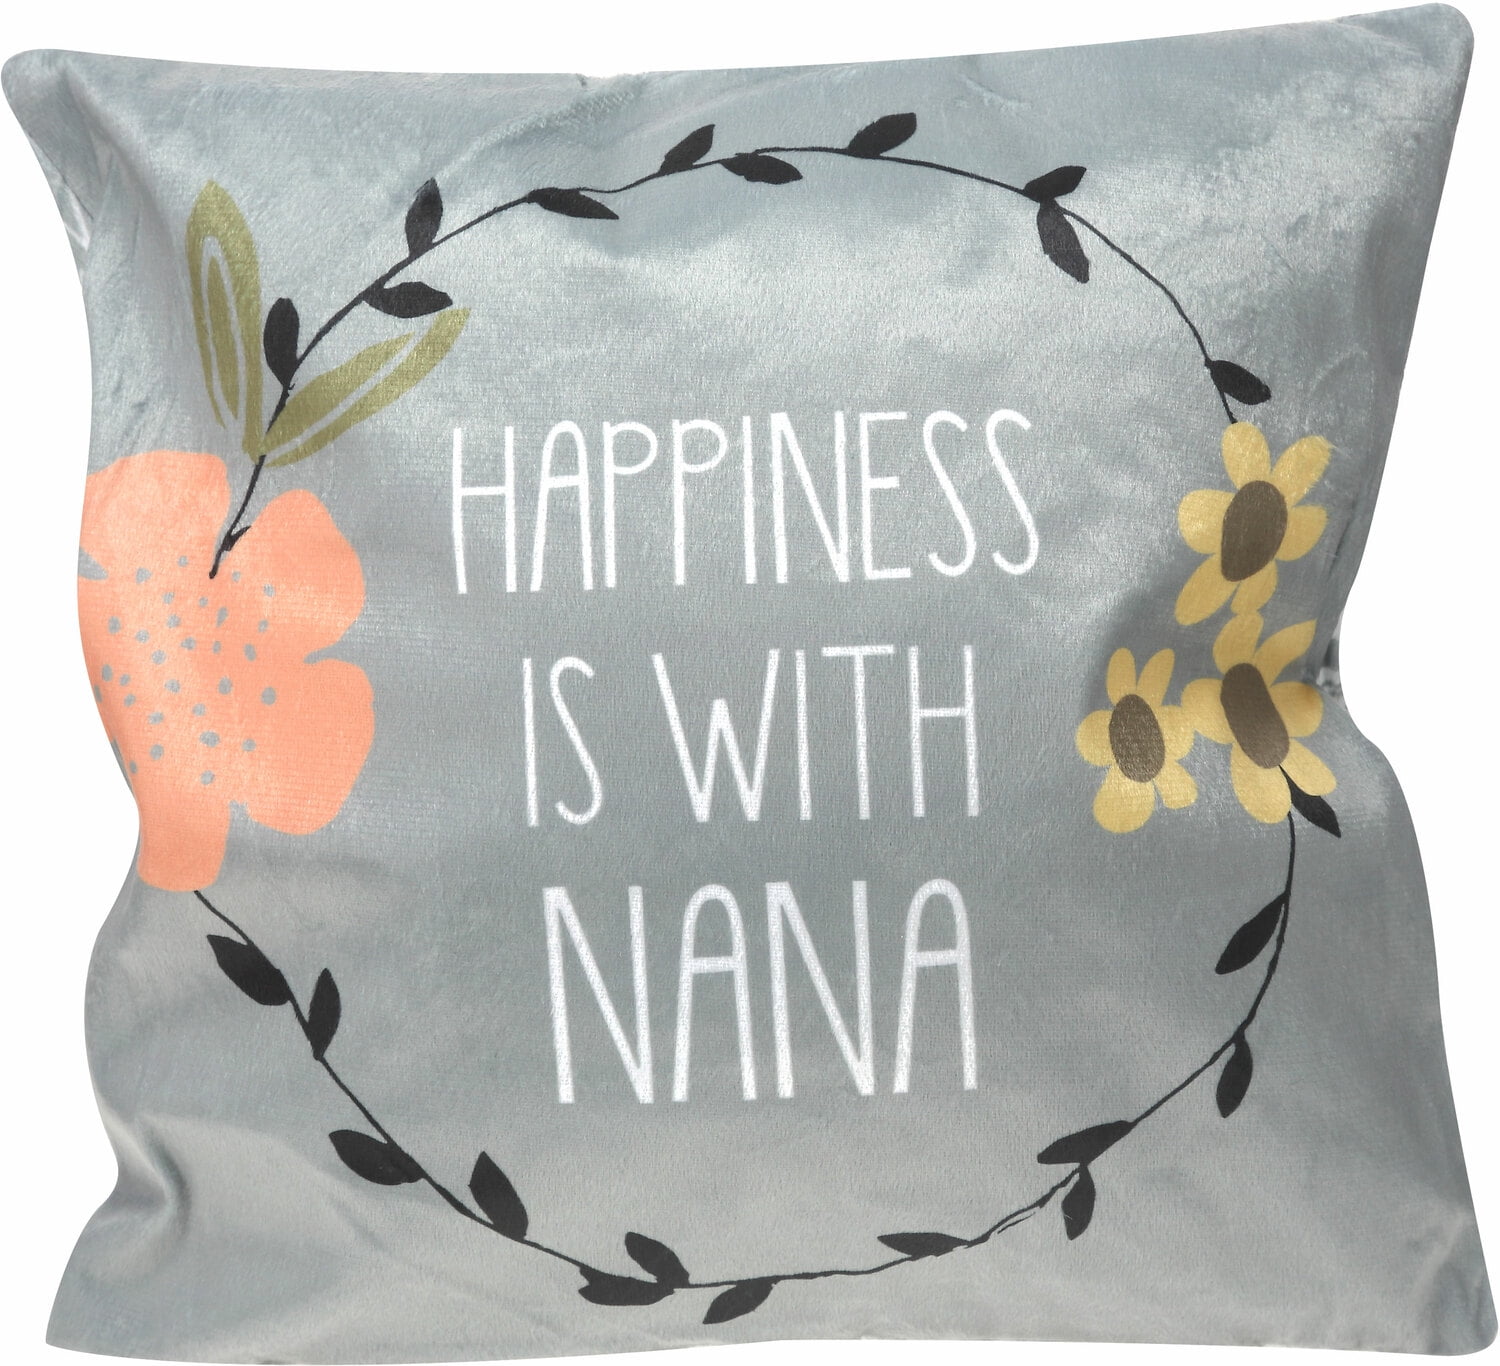 NANA Decorative Pillows for Men Luxury Yacht at Sunrise Decorative Pillows for Sofa 13.78 X 13.78 Inch Heart-Shaped Cushion Gift for Friends/Children/Girl/Valentine's Day